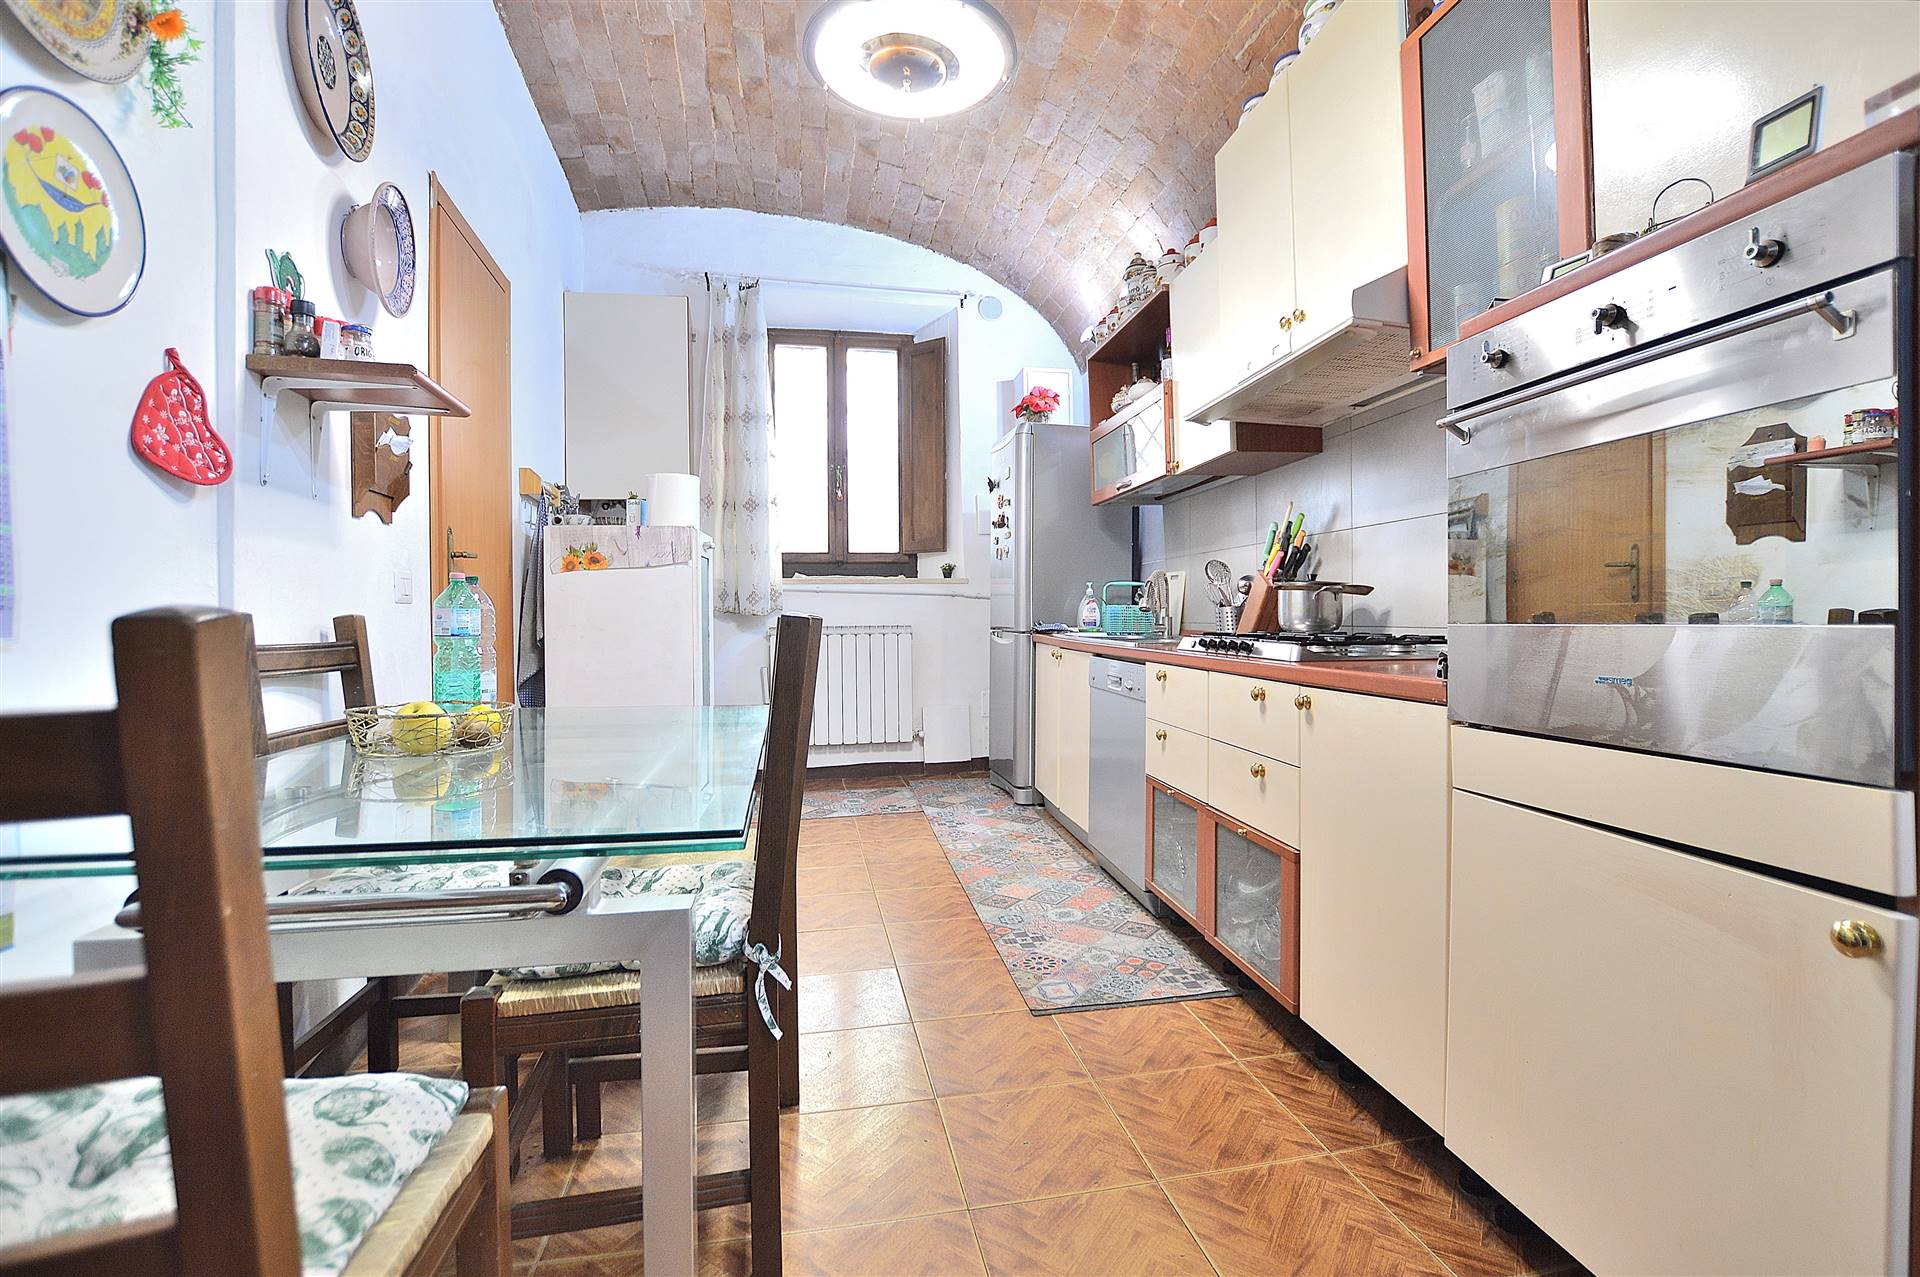 CENTRO - CONTRADA PANTERA, SIENA, Apartment for sale of 82 Sq. mt., Good condition, Heating Individual heating system, Energetic class: G, Epi: 175 